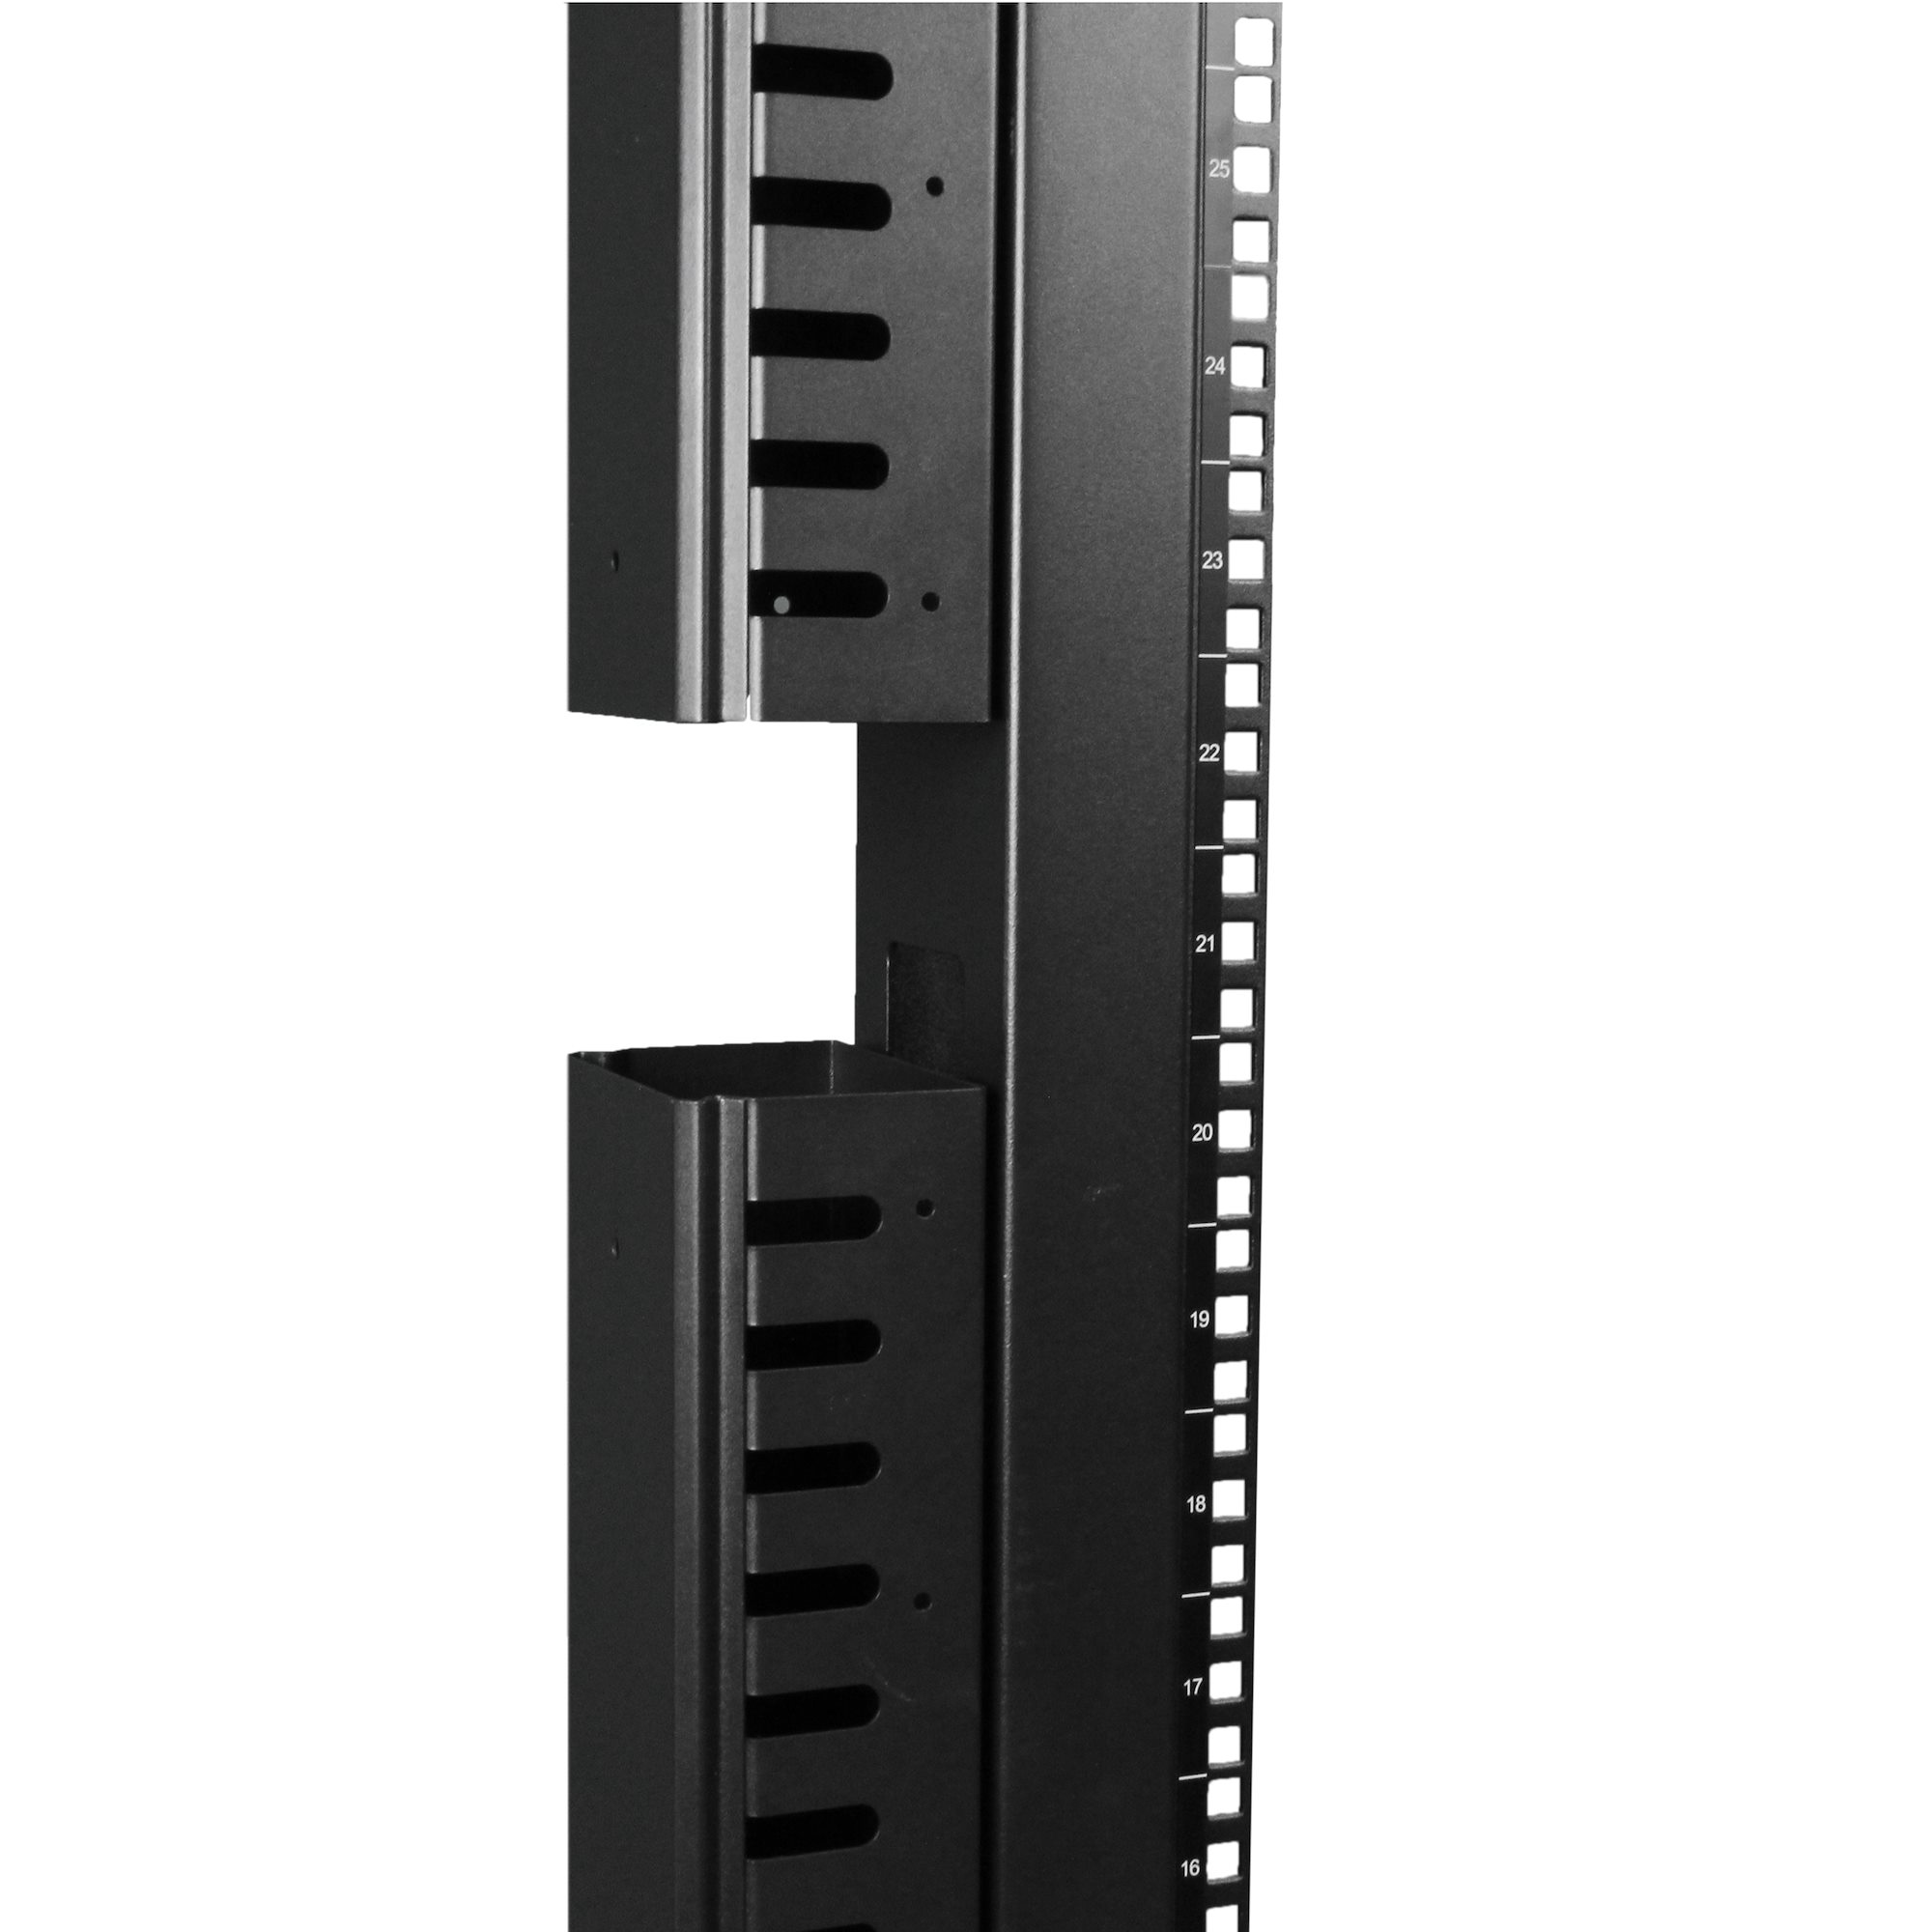 Horizontal Zero U Cable Management Server Rack - 23 - AnD Cable Products